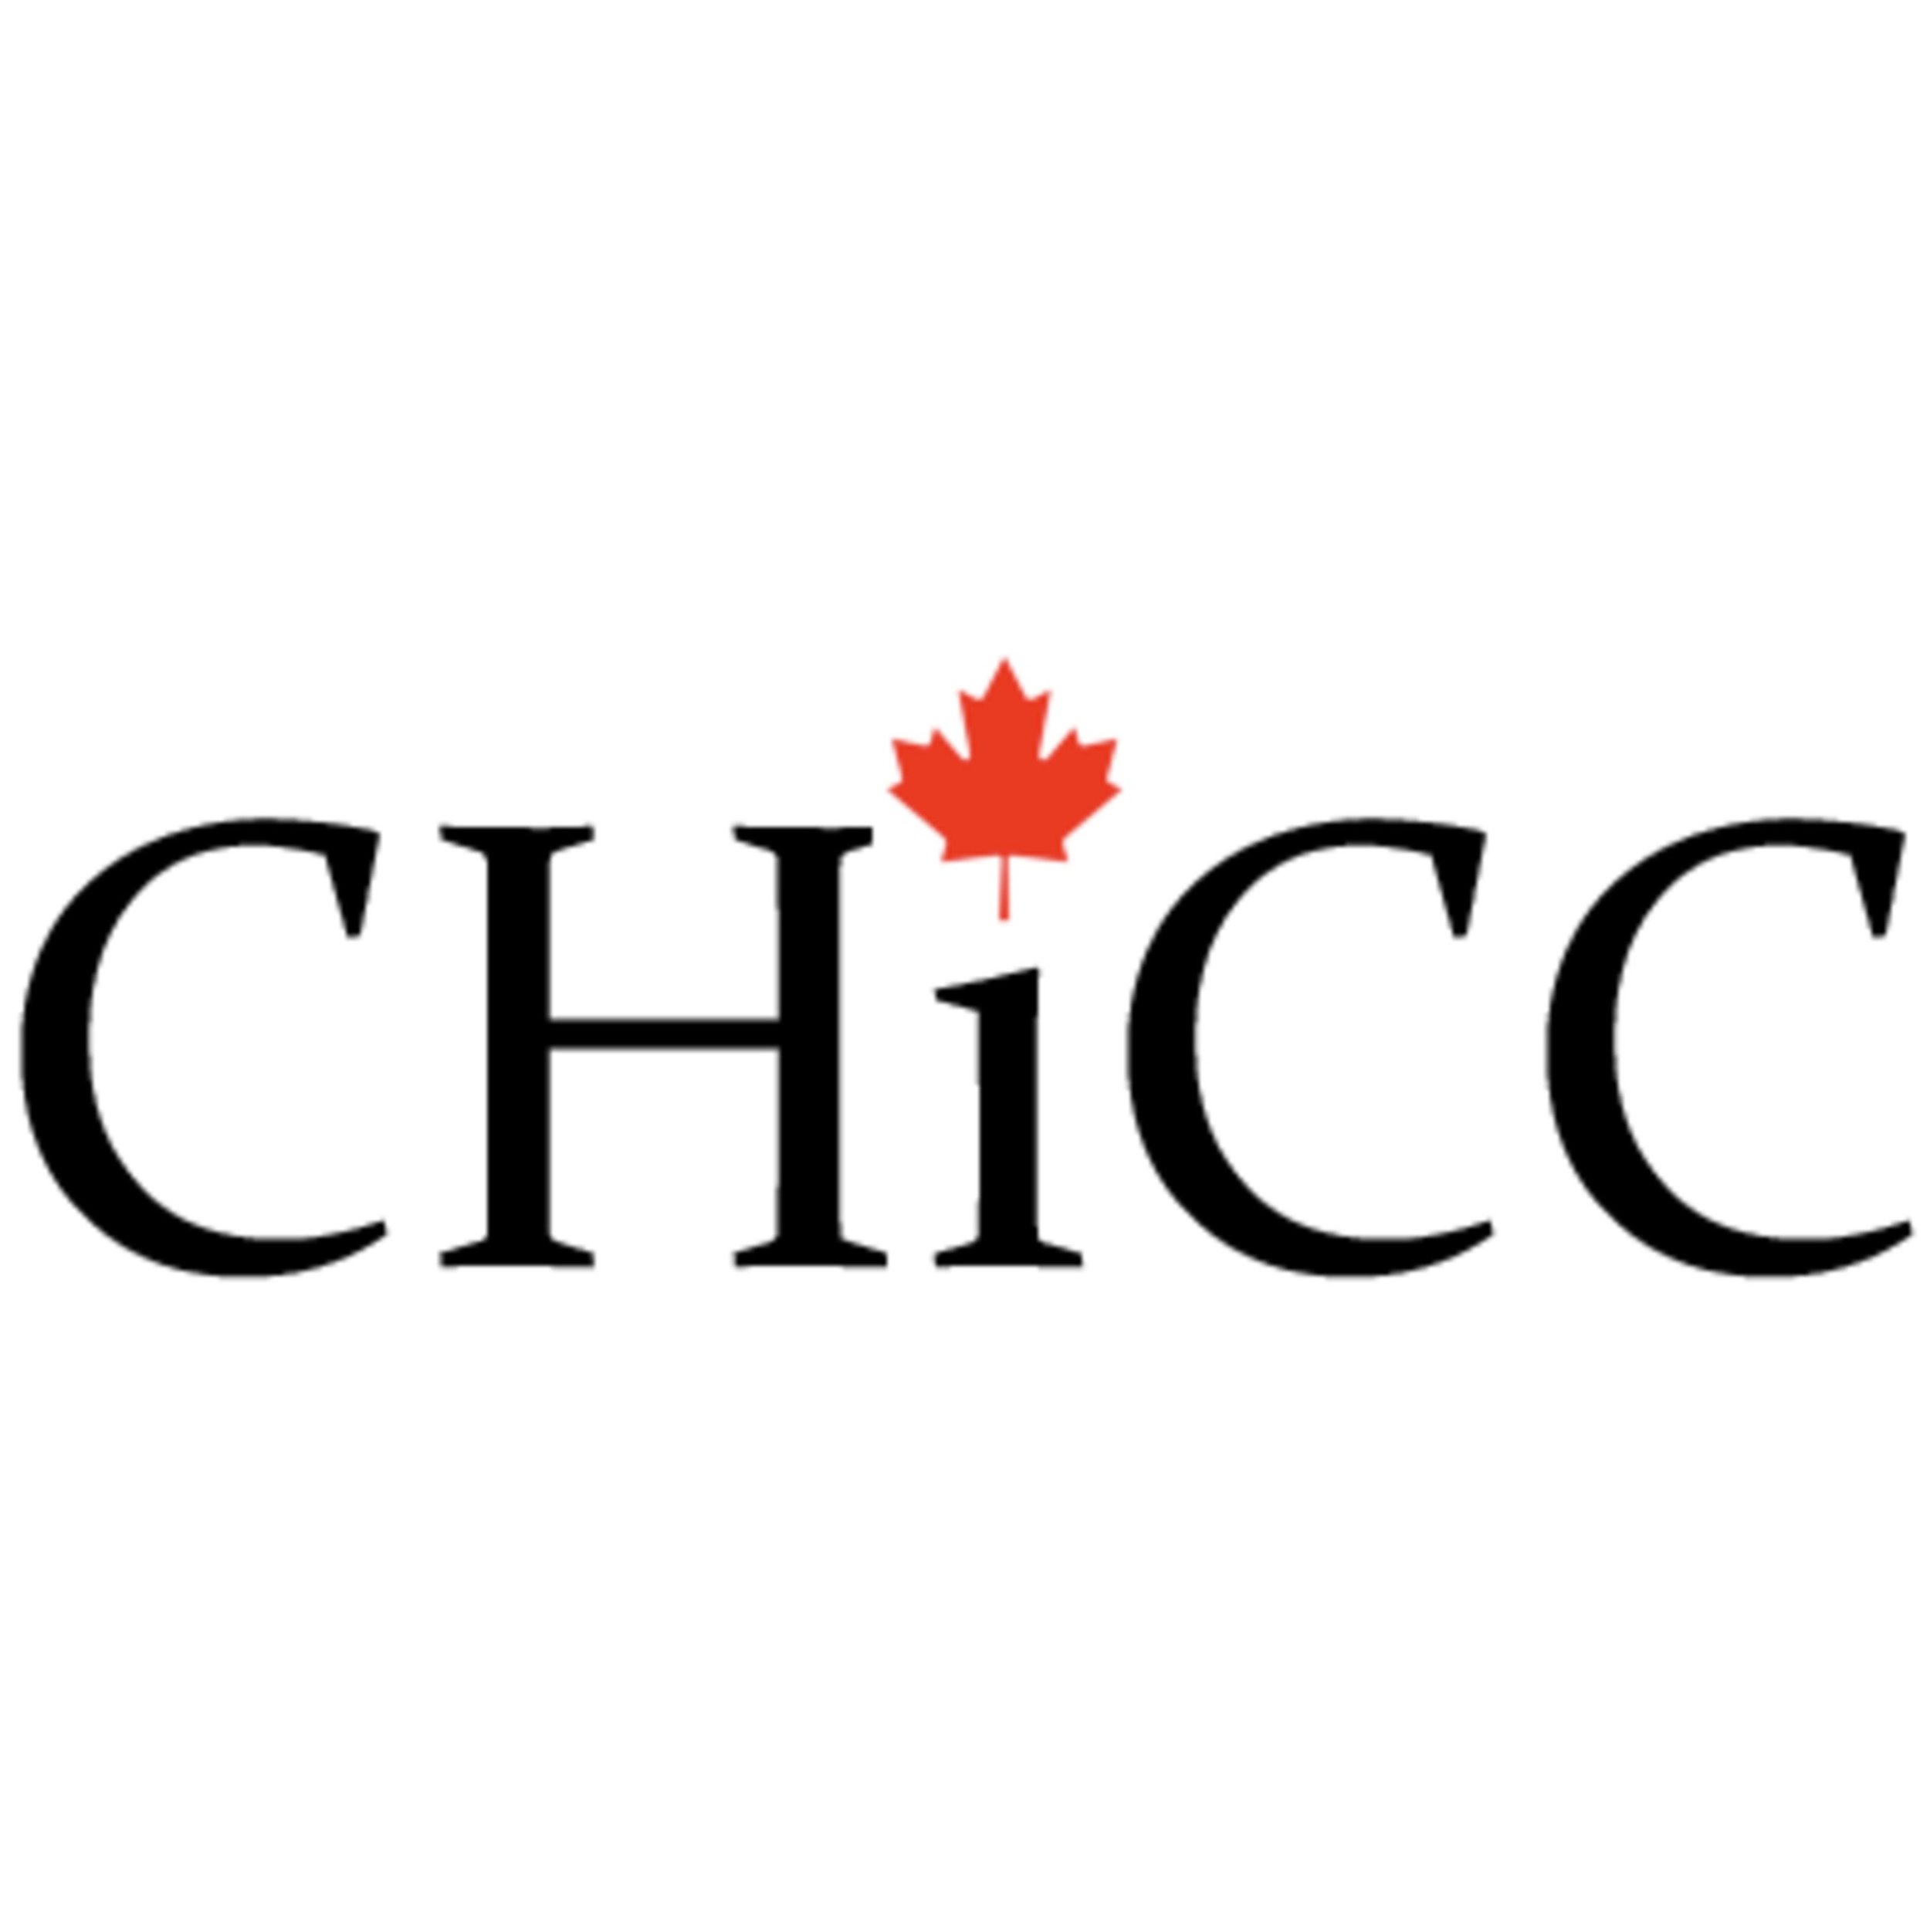 CHICC